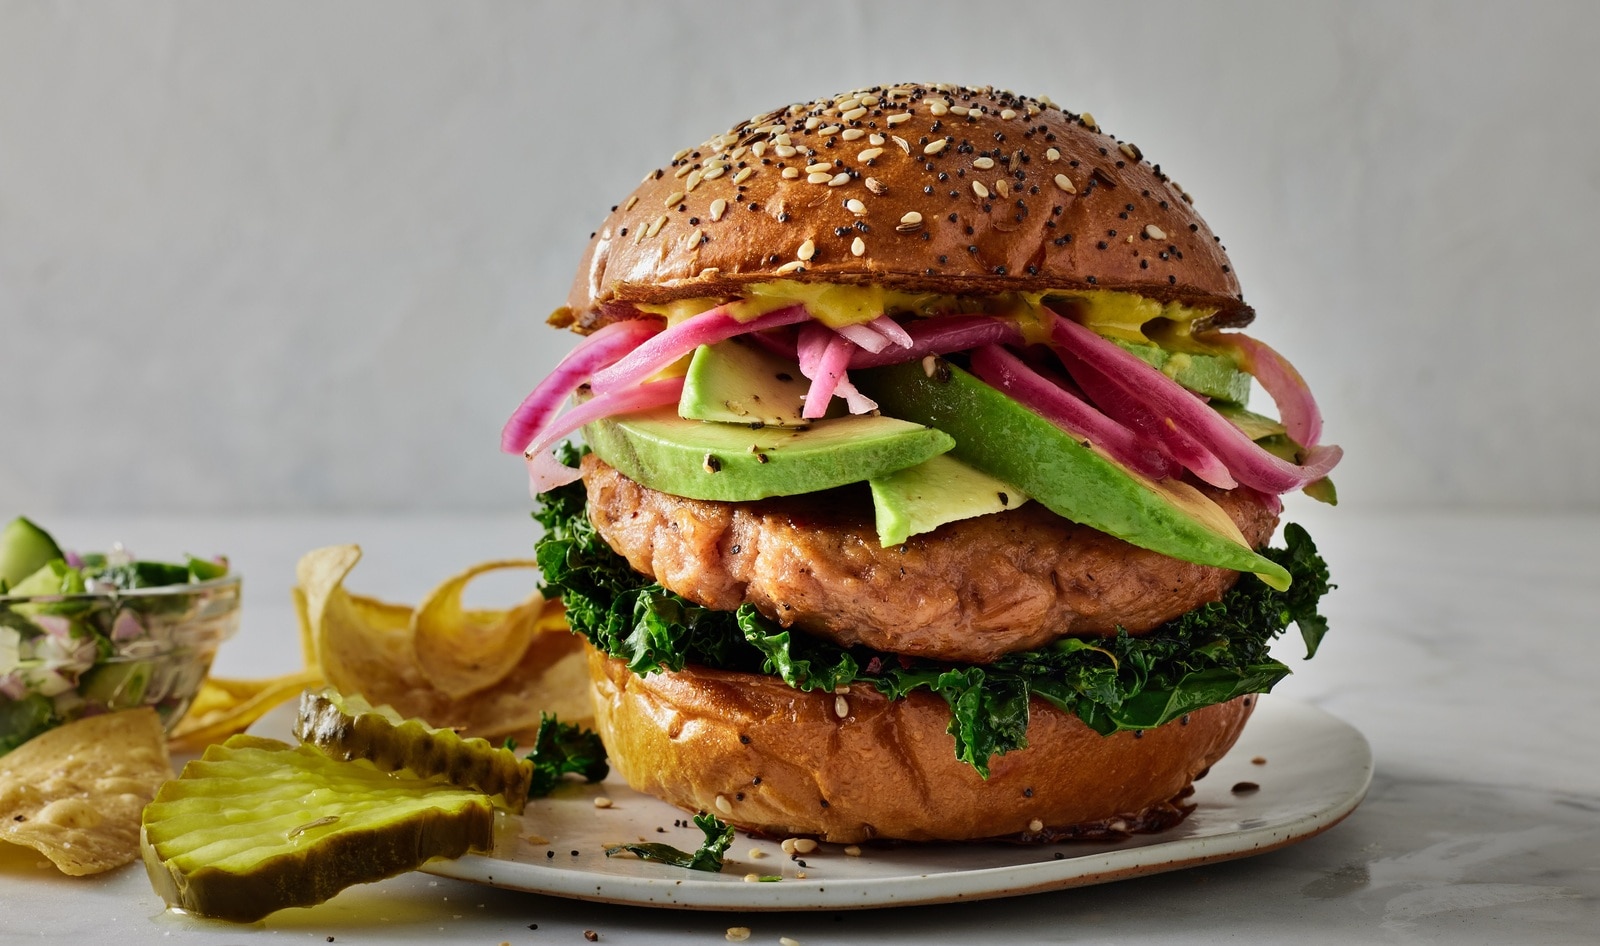 How Good Catch's Vegan Salmon Is Taking a Bite Out of the Biggest Fish Category